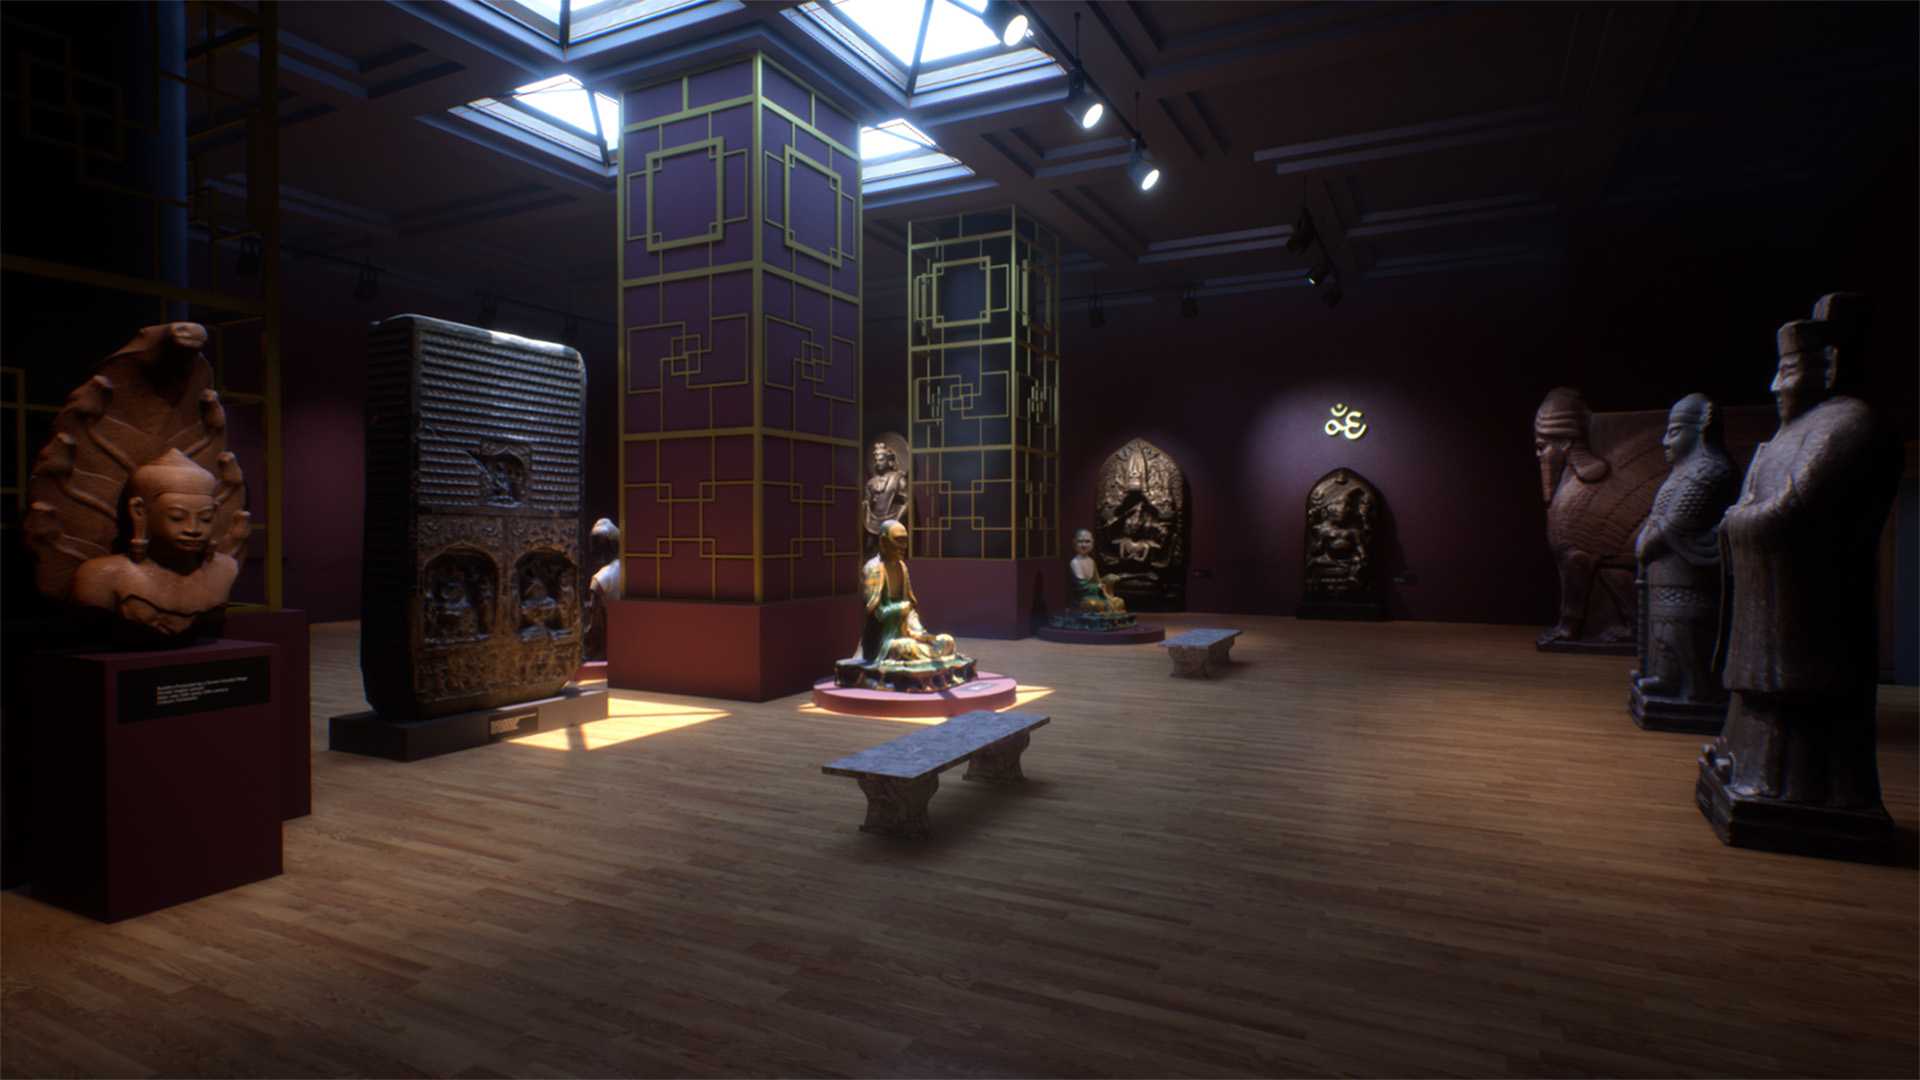 The Grand Museum VR